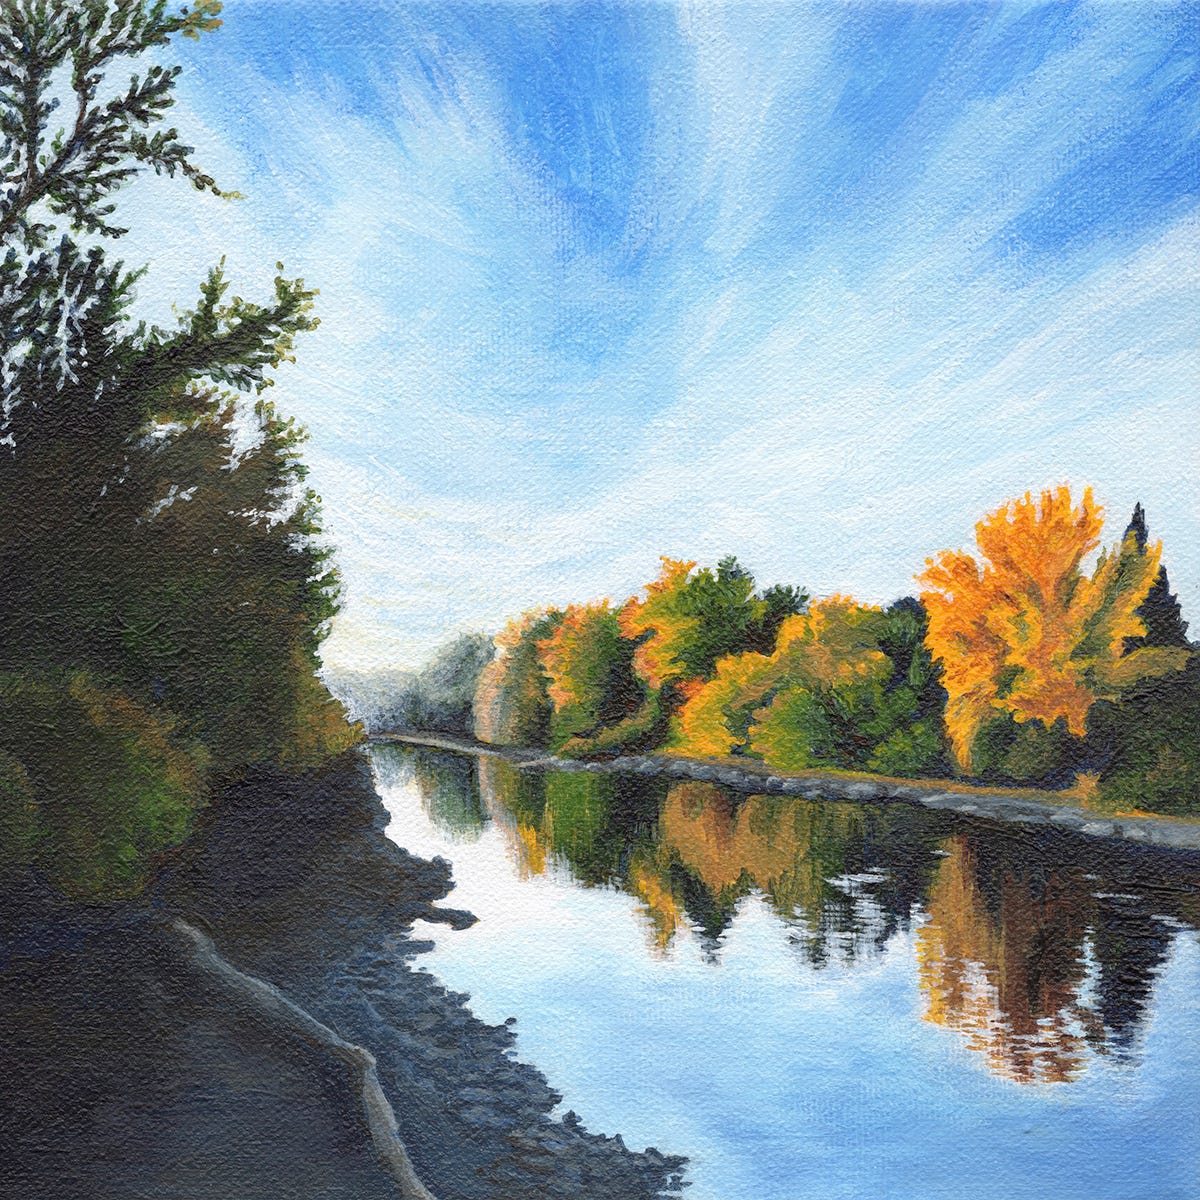 Painting of an autumn scene along the Bow River. On the far bank of the river, the trees are lit up in a mixture of varied greens and bright orange that are mirrored in the water. The sky is bright blue and streaked with a fan of wispy clouds.